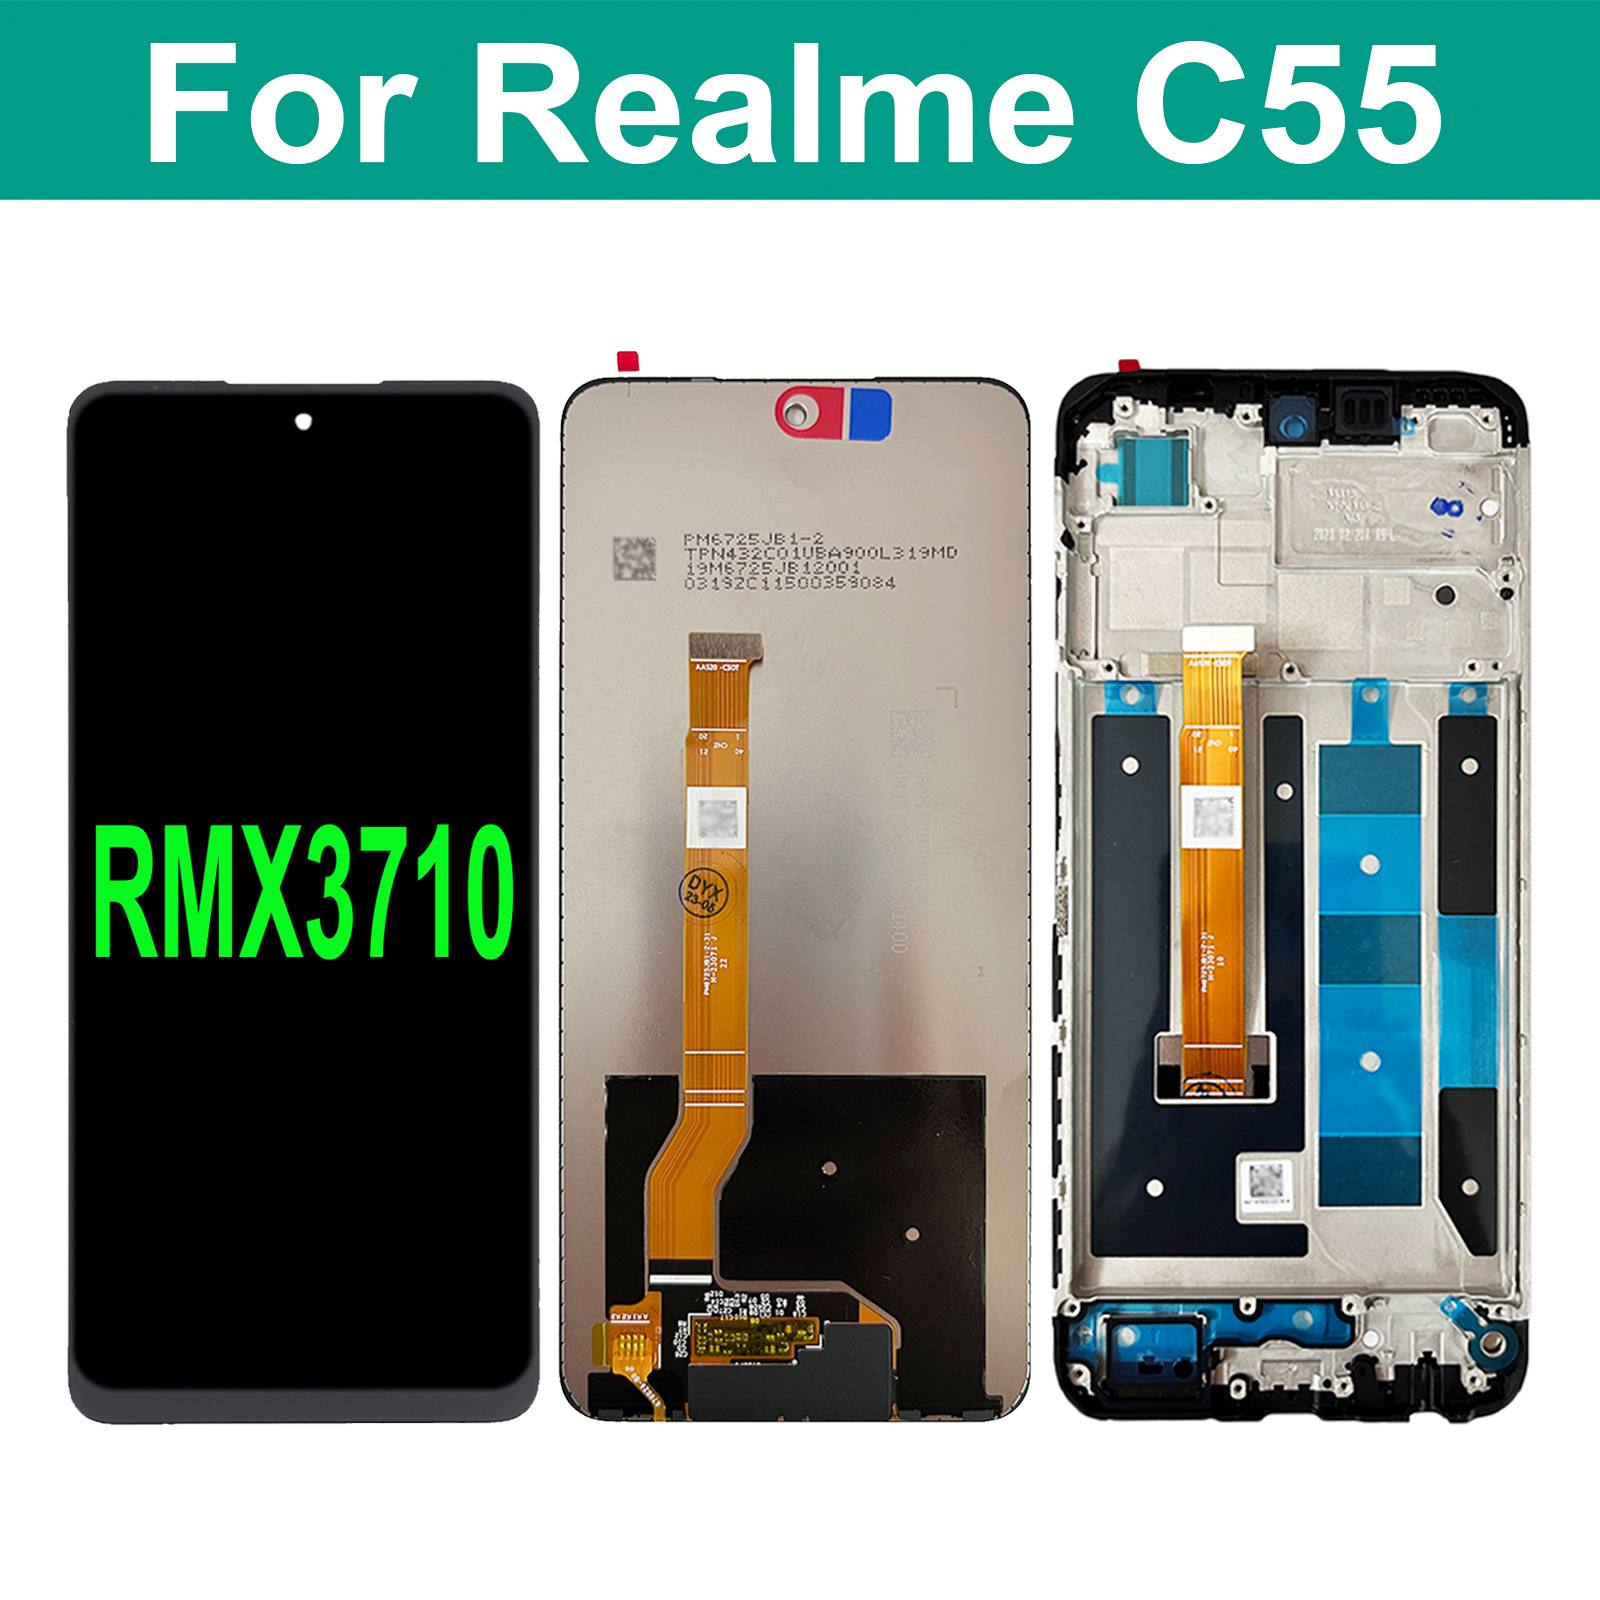 6-72-Original-For-OPPO-Realme-C55-RMX3710-LCD-Display-Touch-Screen-Digitizer-Assembly